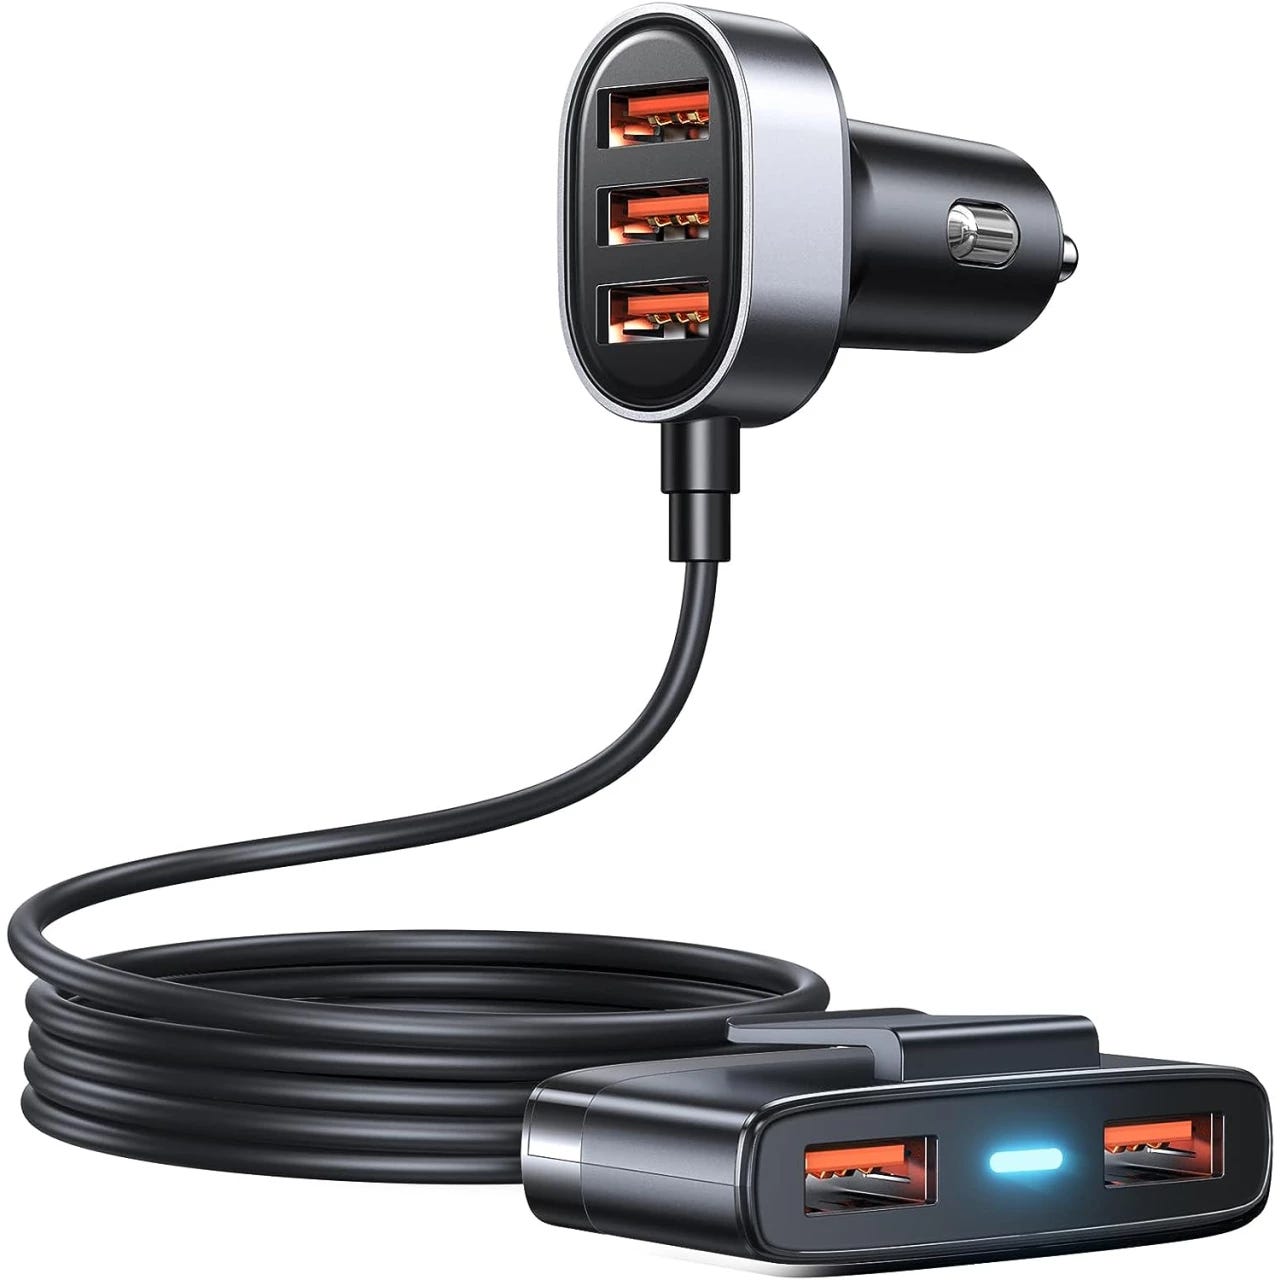 Top 5 Car Chargers in 2023: AINOPE, Fast Charge Dual Port, and